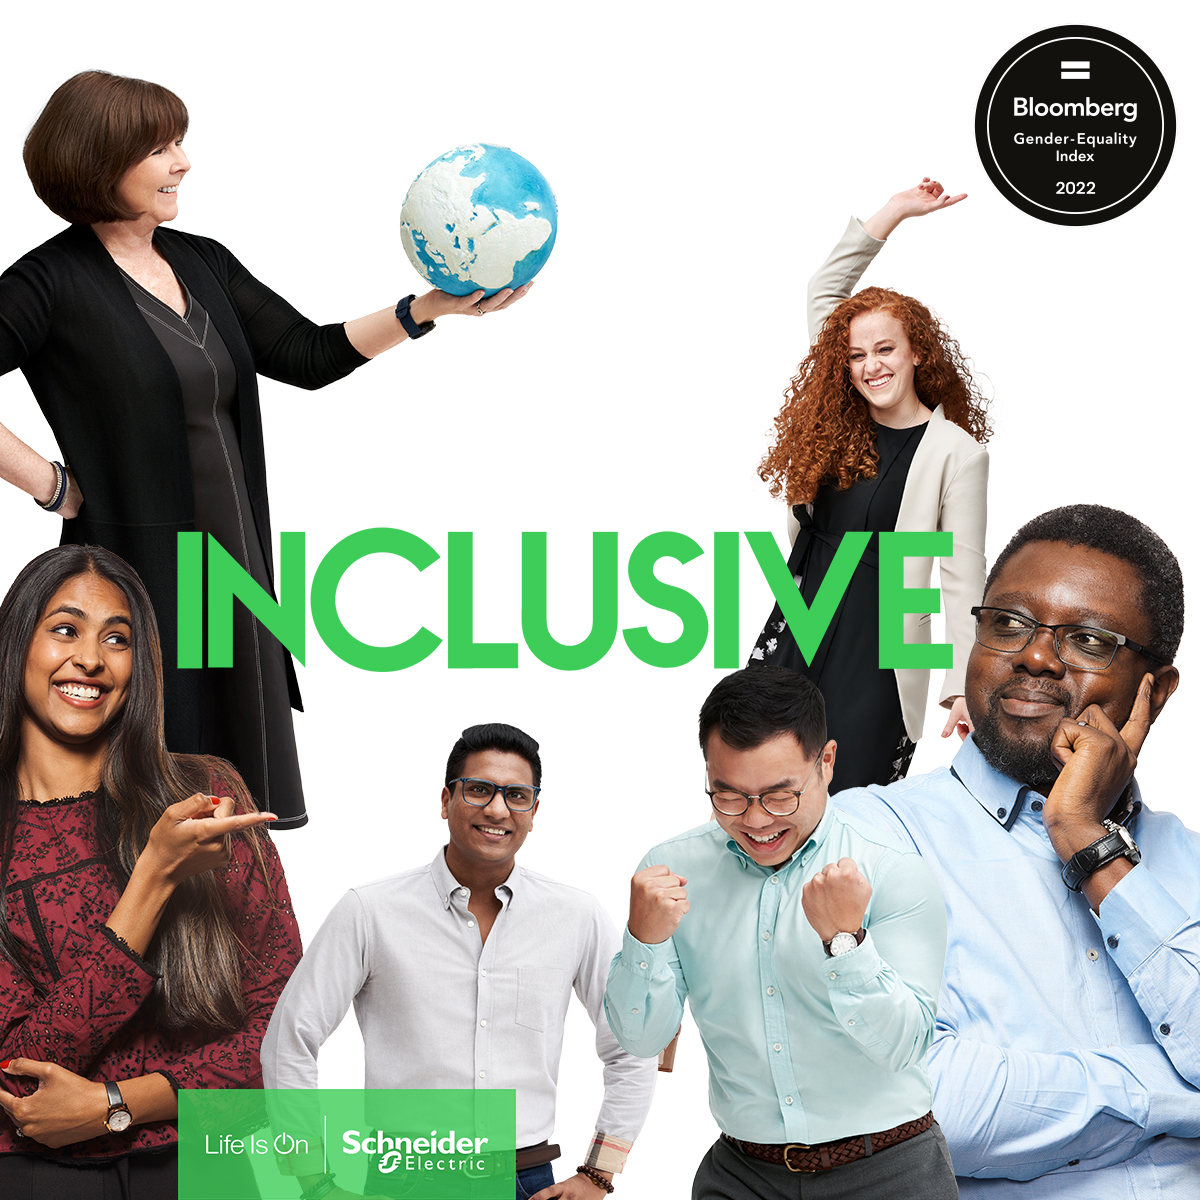 Every day I feel both proud and humbled to be working with such an amazing inclusive #team towards an inspiring common #purpose. @SchneiderElec is included for the 5th year in 2022 Bloomberg's Gender-Equality Index. #segreatpeople #LifeIsOn #BloombergGEI  bloomberg.com/gei